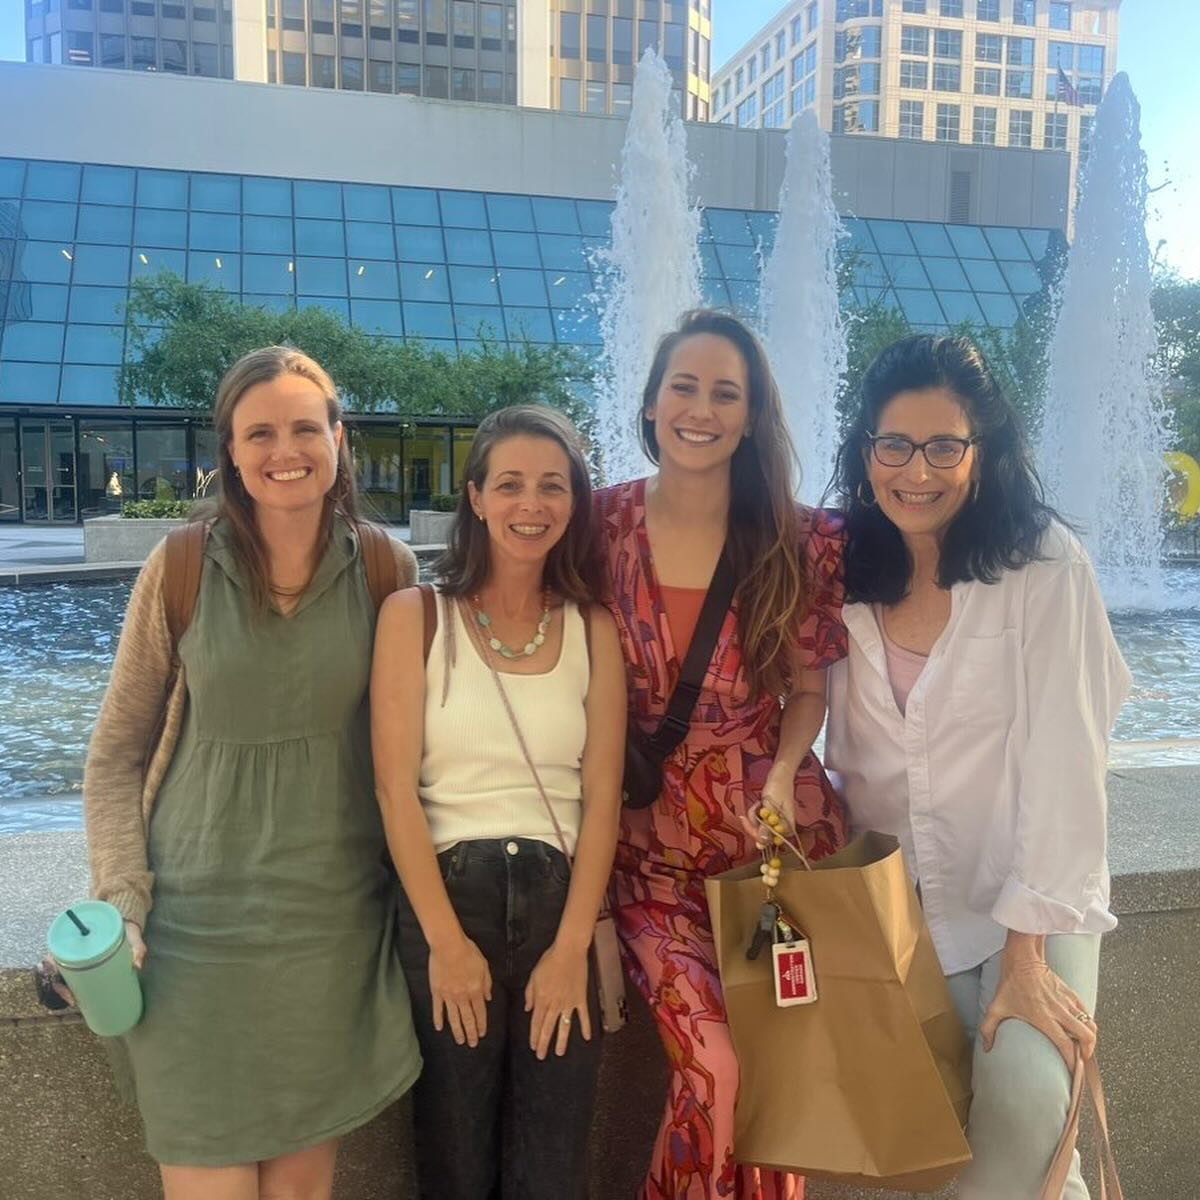 A few of our fabulous team members from the Downtown office enjoying a post-work hangout in the city! 🤩✨